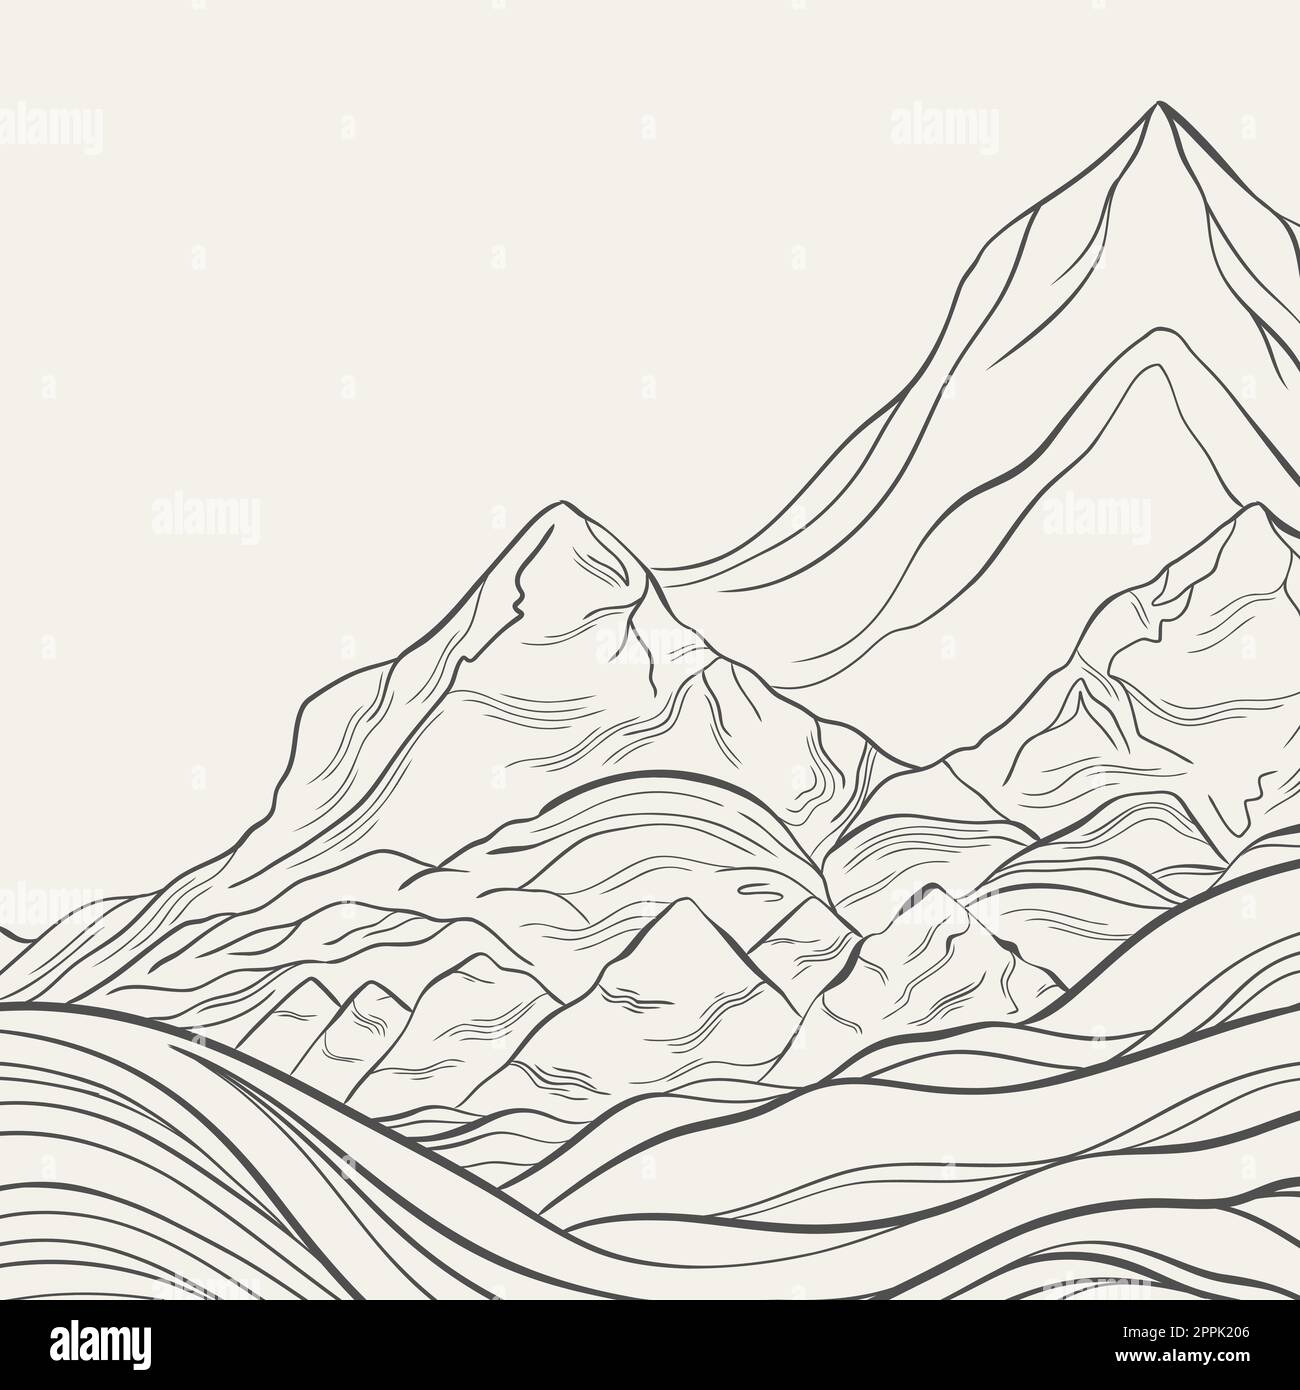 freehand sketch of a mountain landscape with thin graceful lines linear mountains on a black background 2PPK206